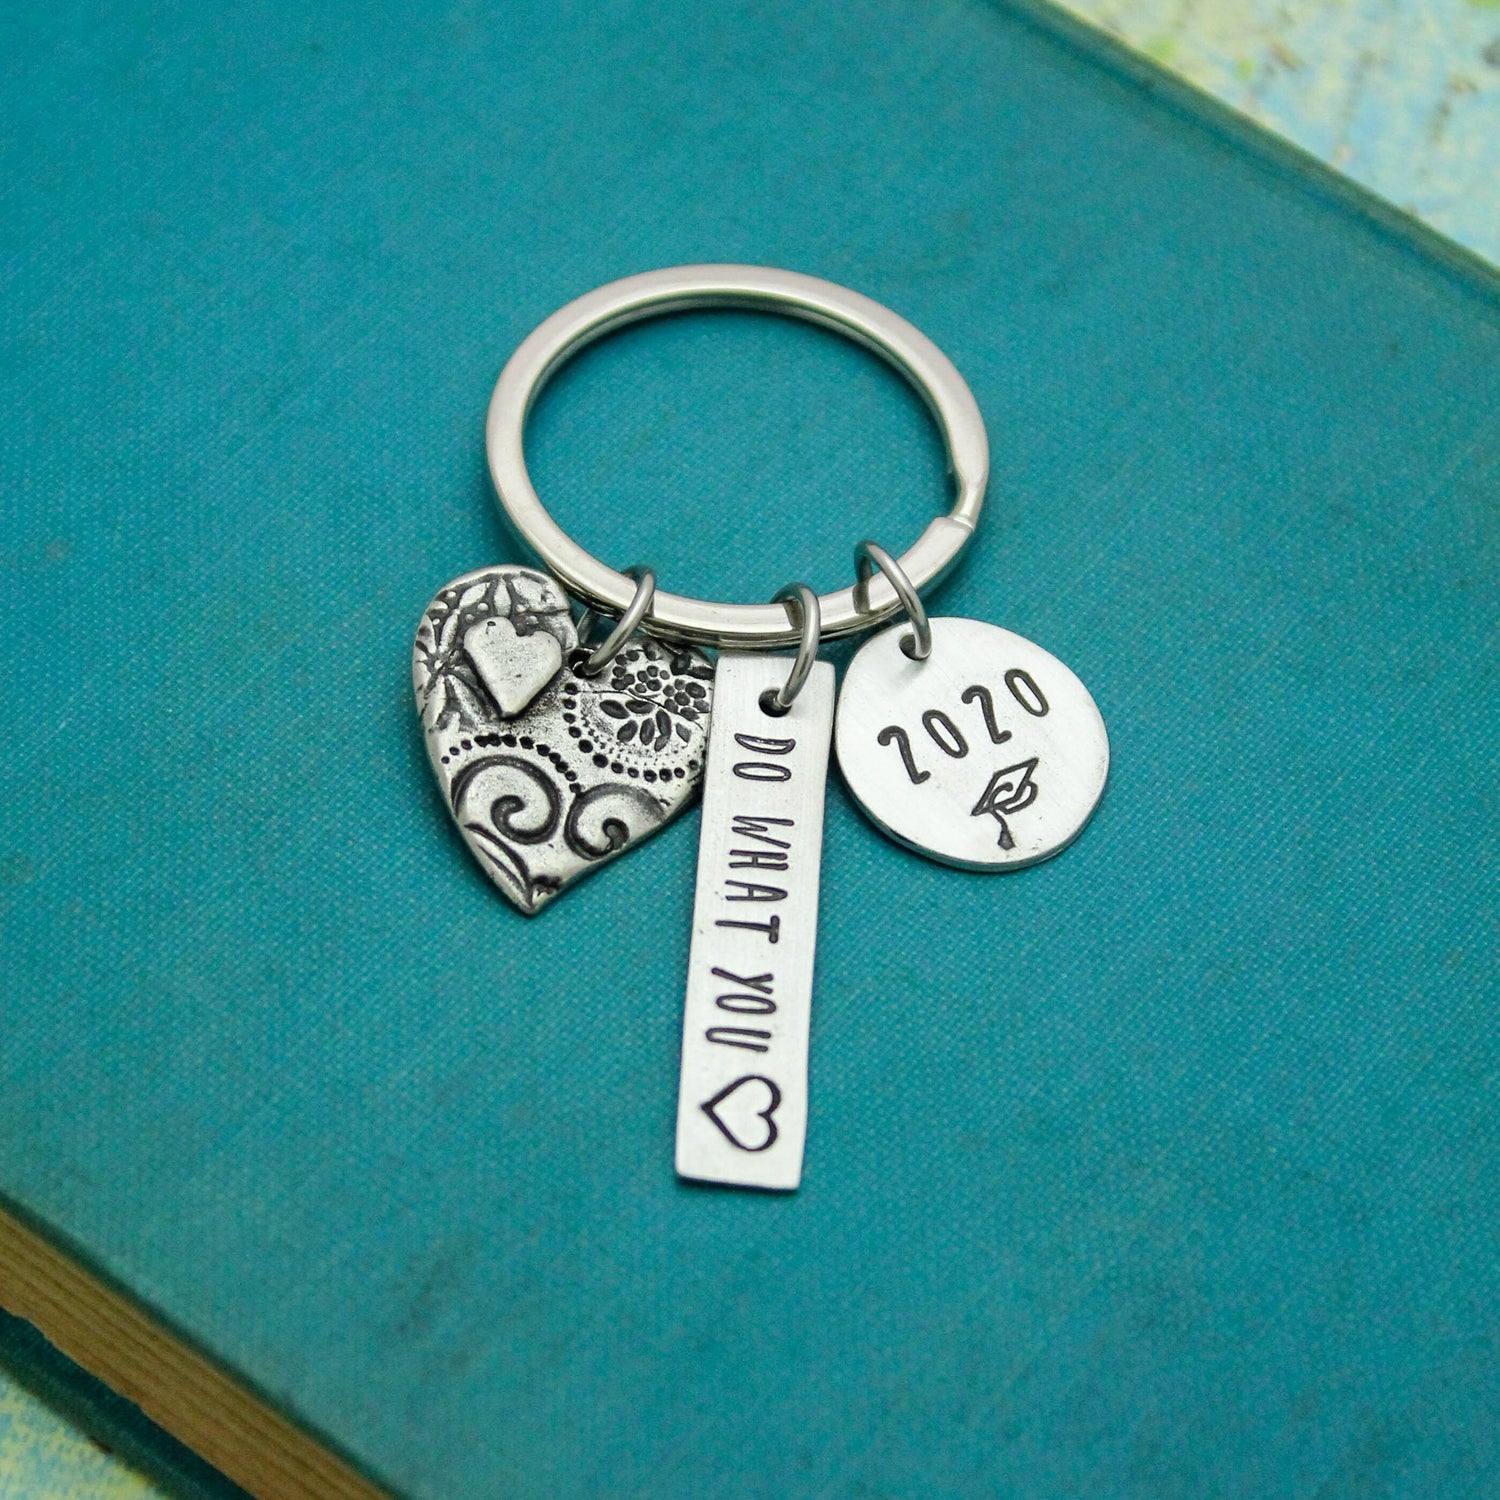 Do What You Love Keychain, Personalized Grad Keychain, Graduation Gifts, Heart Love Keychain, Graduate Gift, Cute + Funky Grad Key Chain